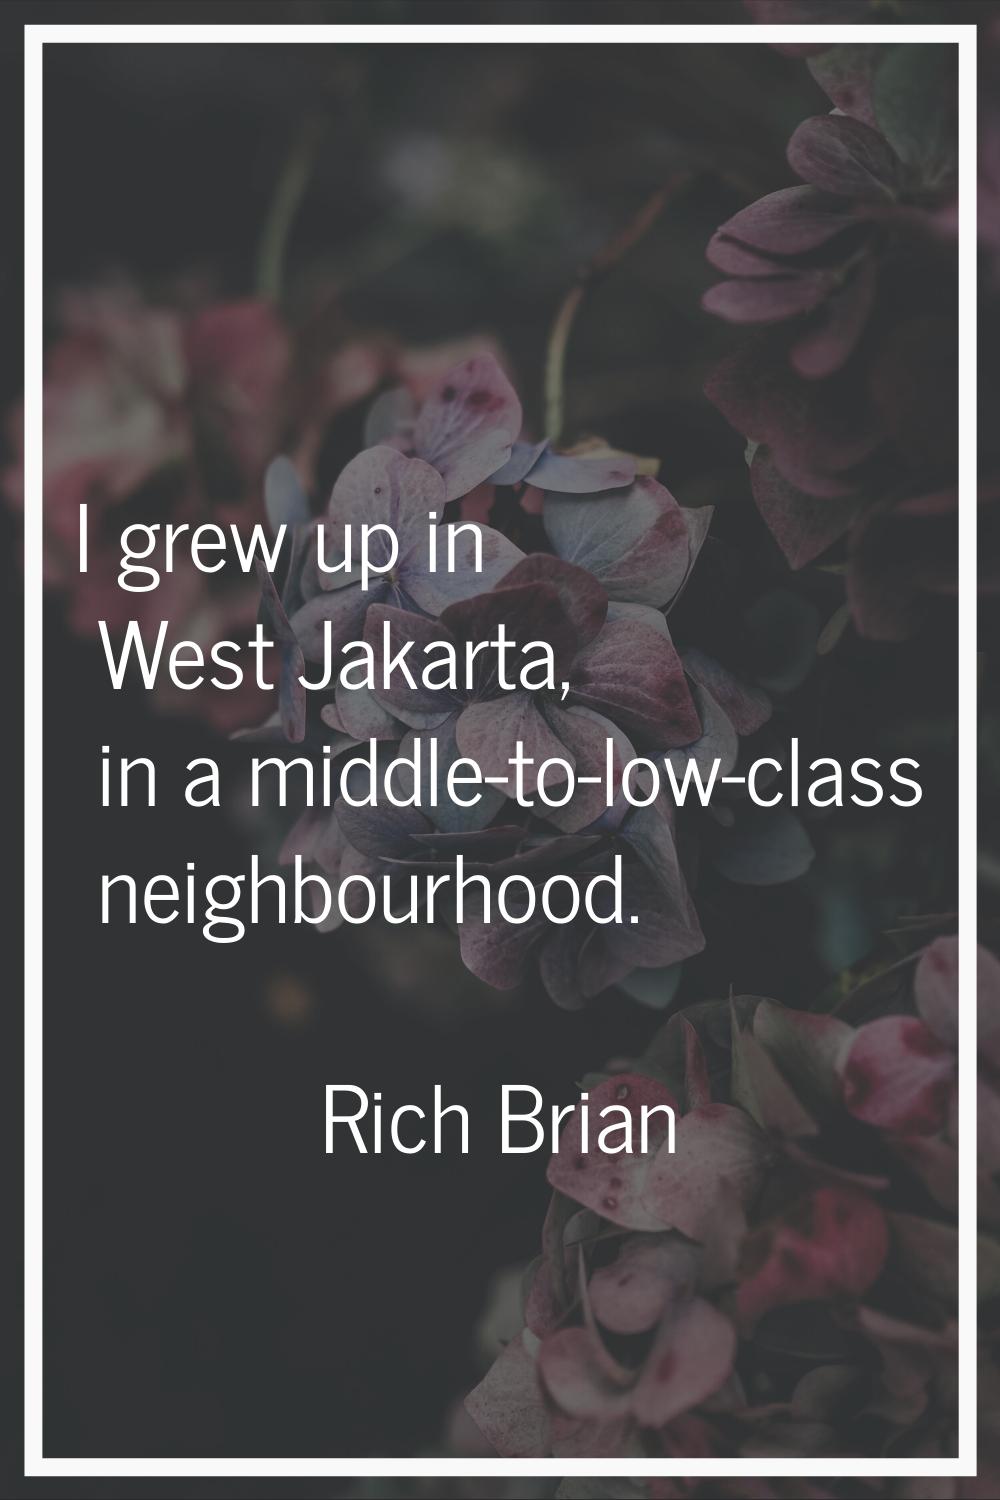 I grew up in West Jakarta, in a middle-to-low-class neighbourhood.